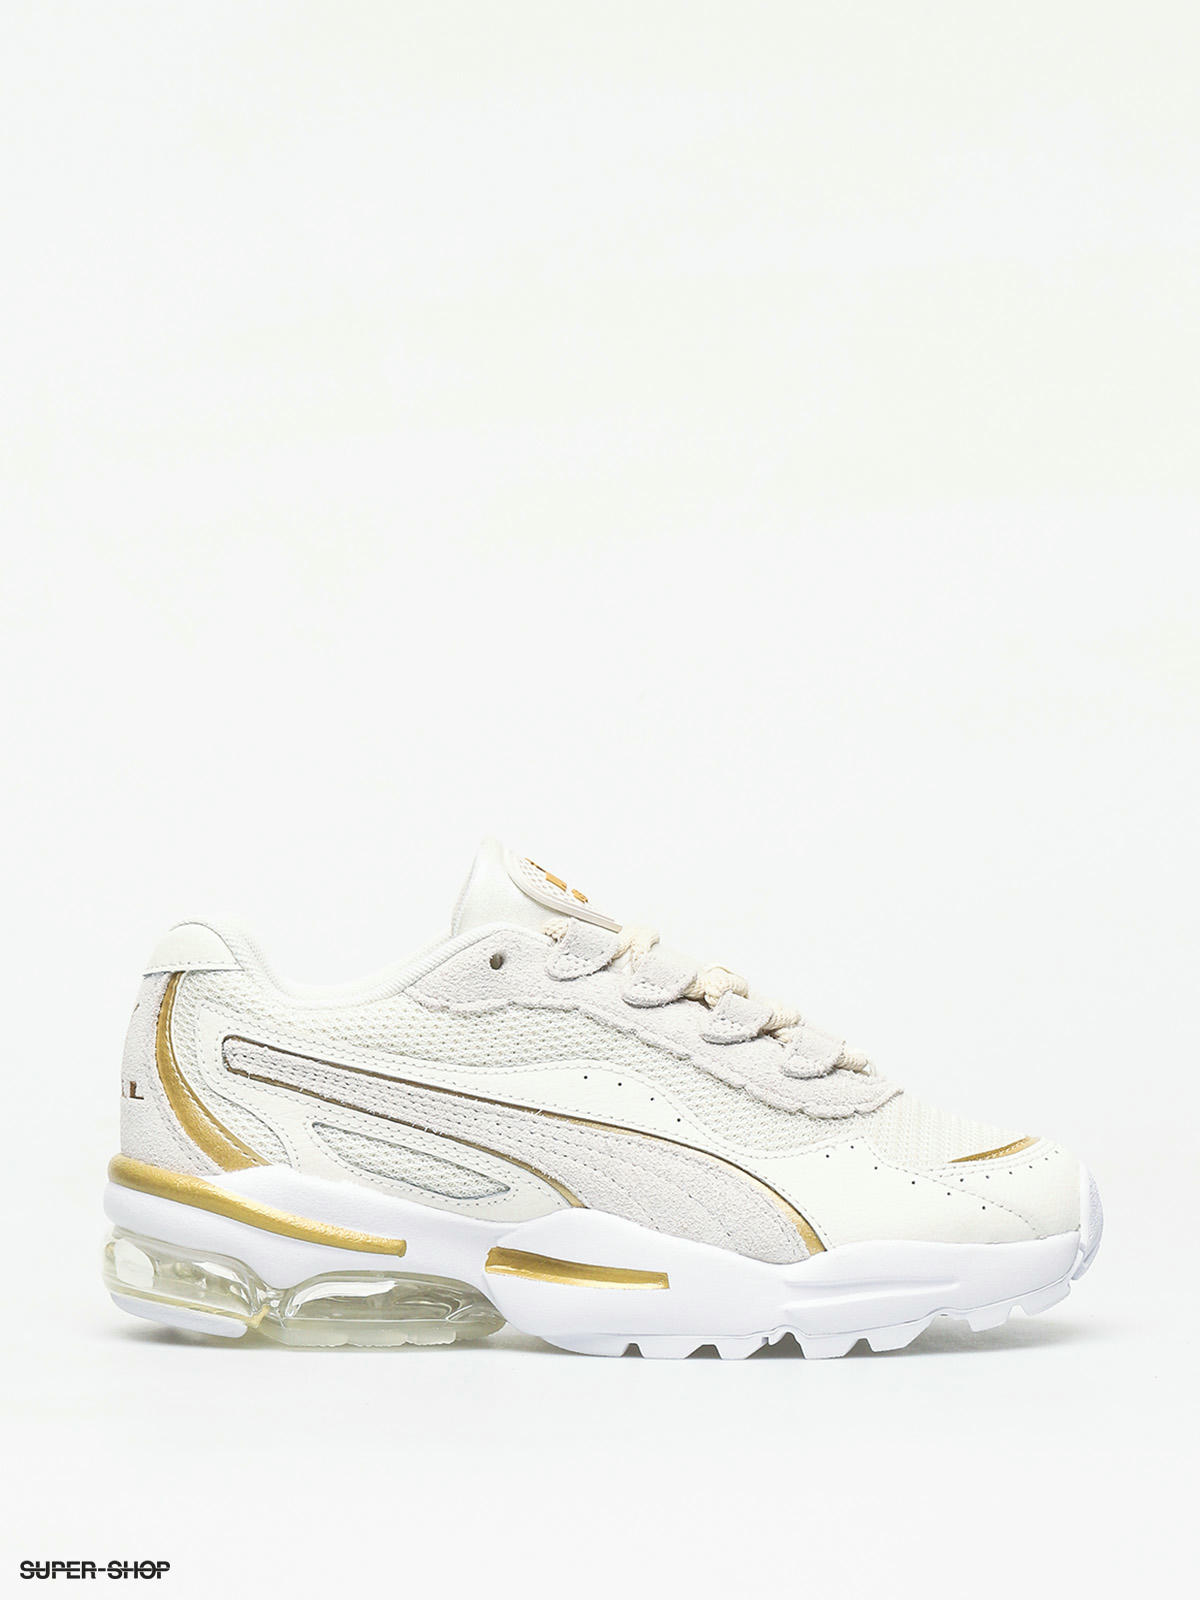 white puma shoes with gold